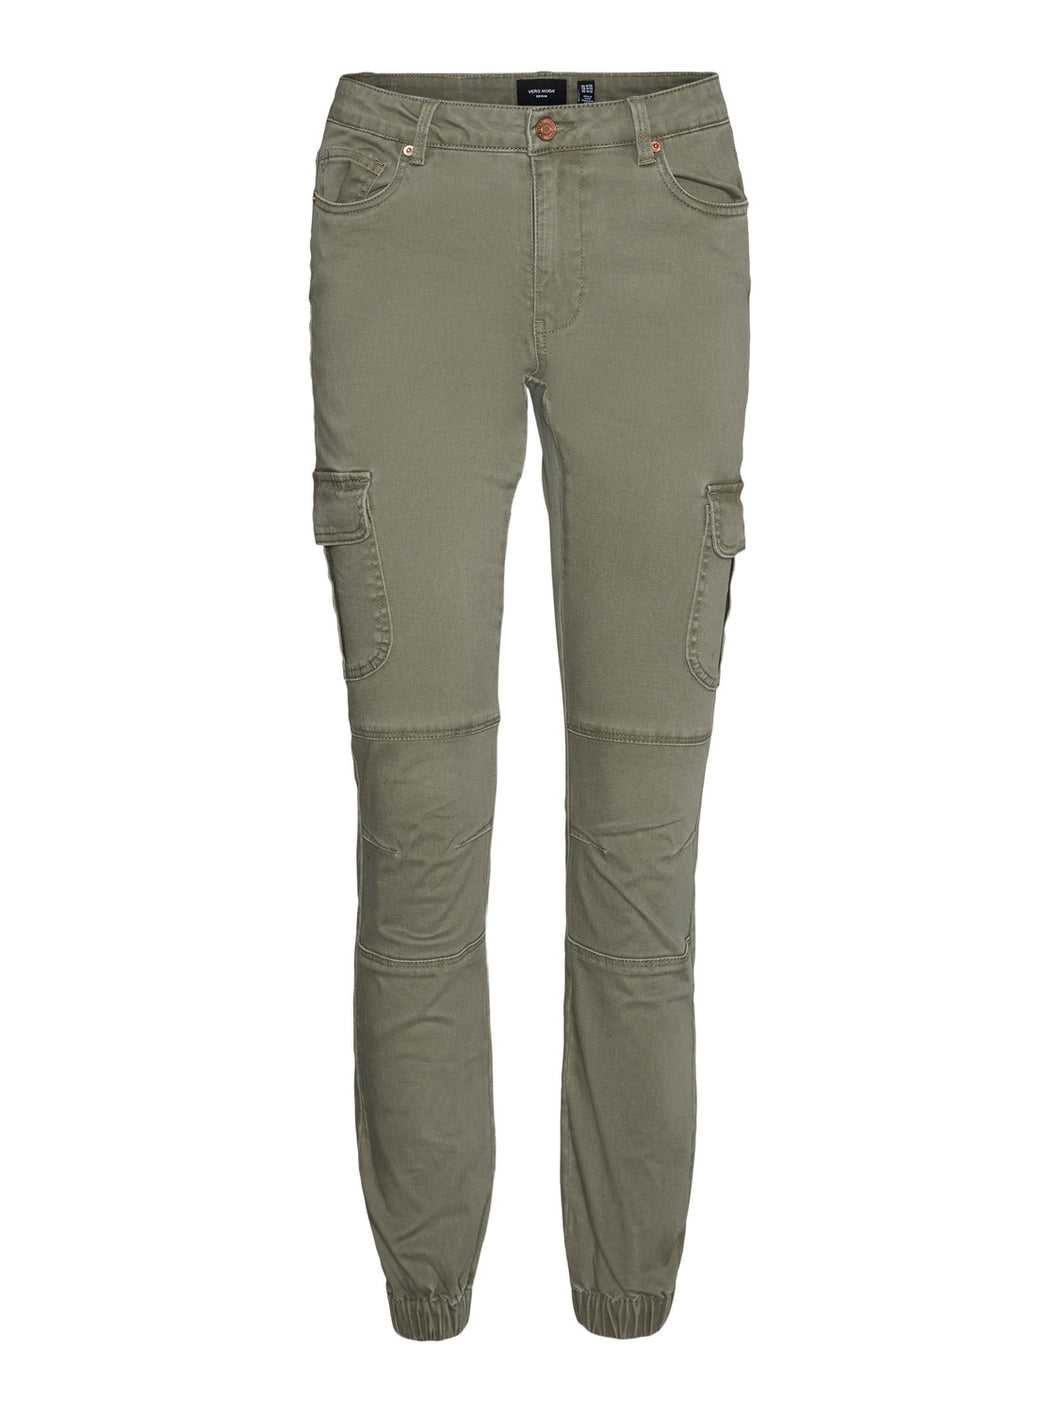 VMIVY Jeans - Ivy Green